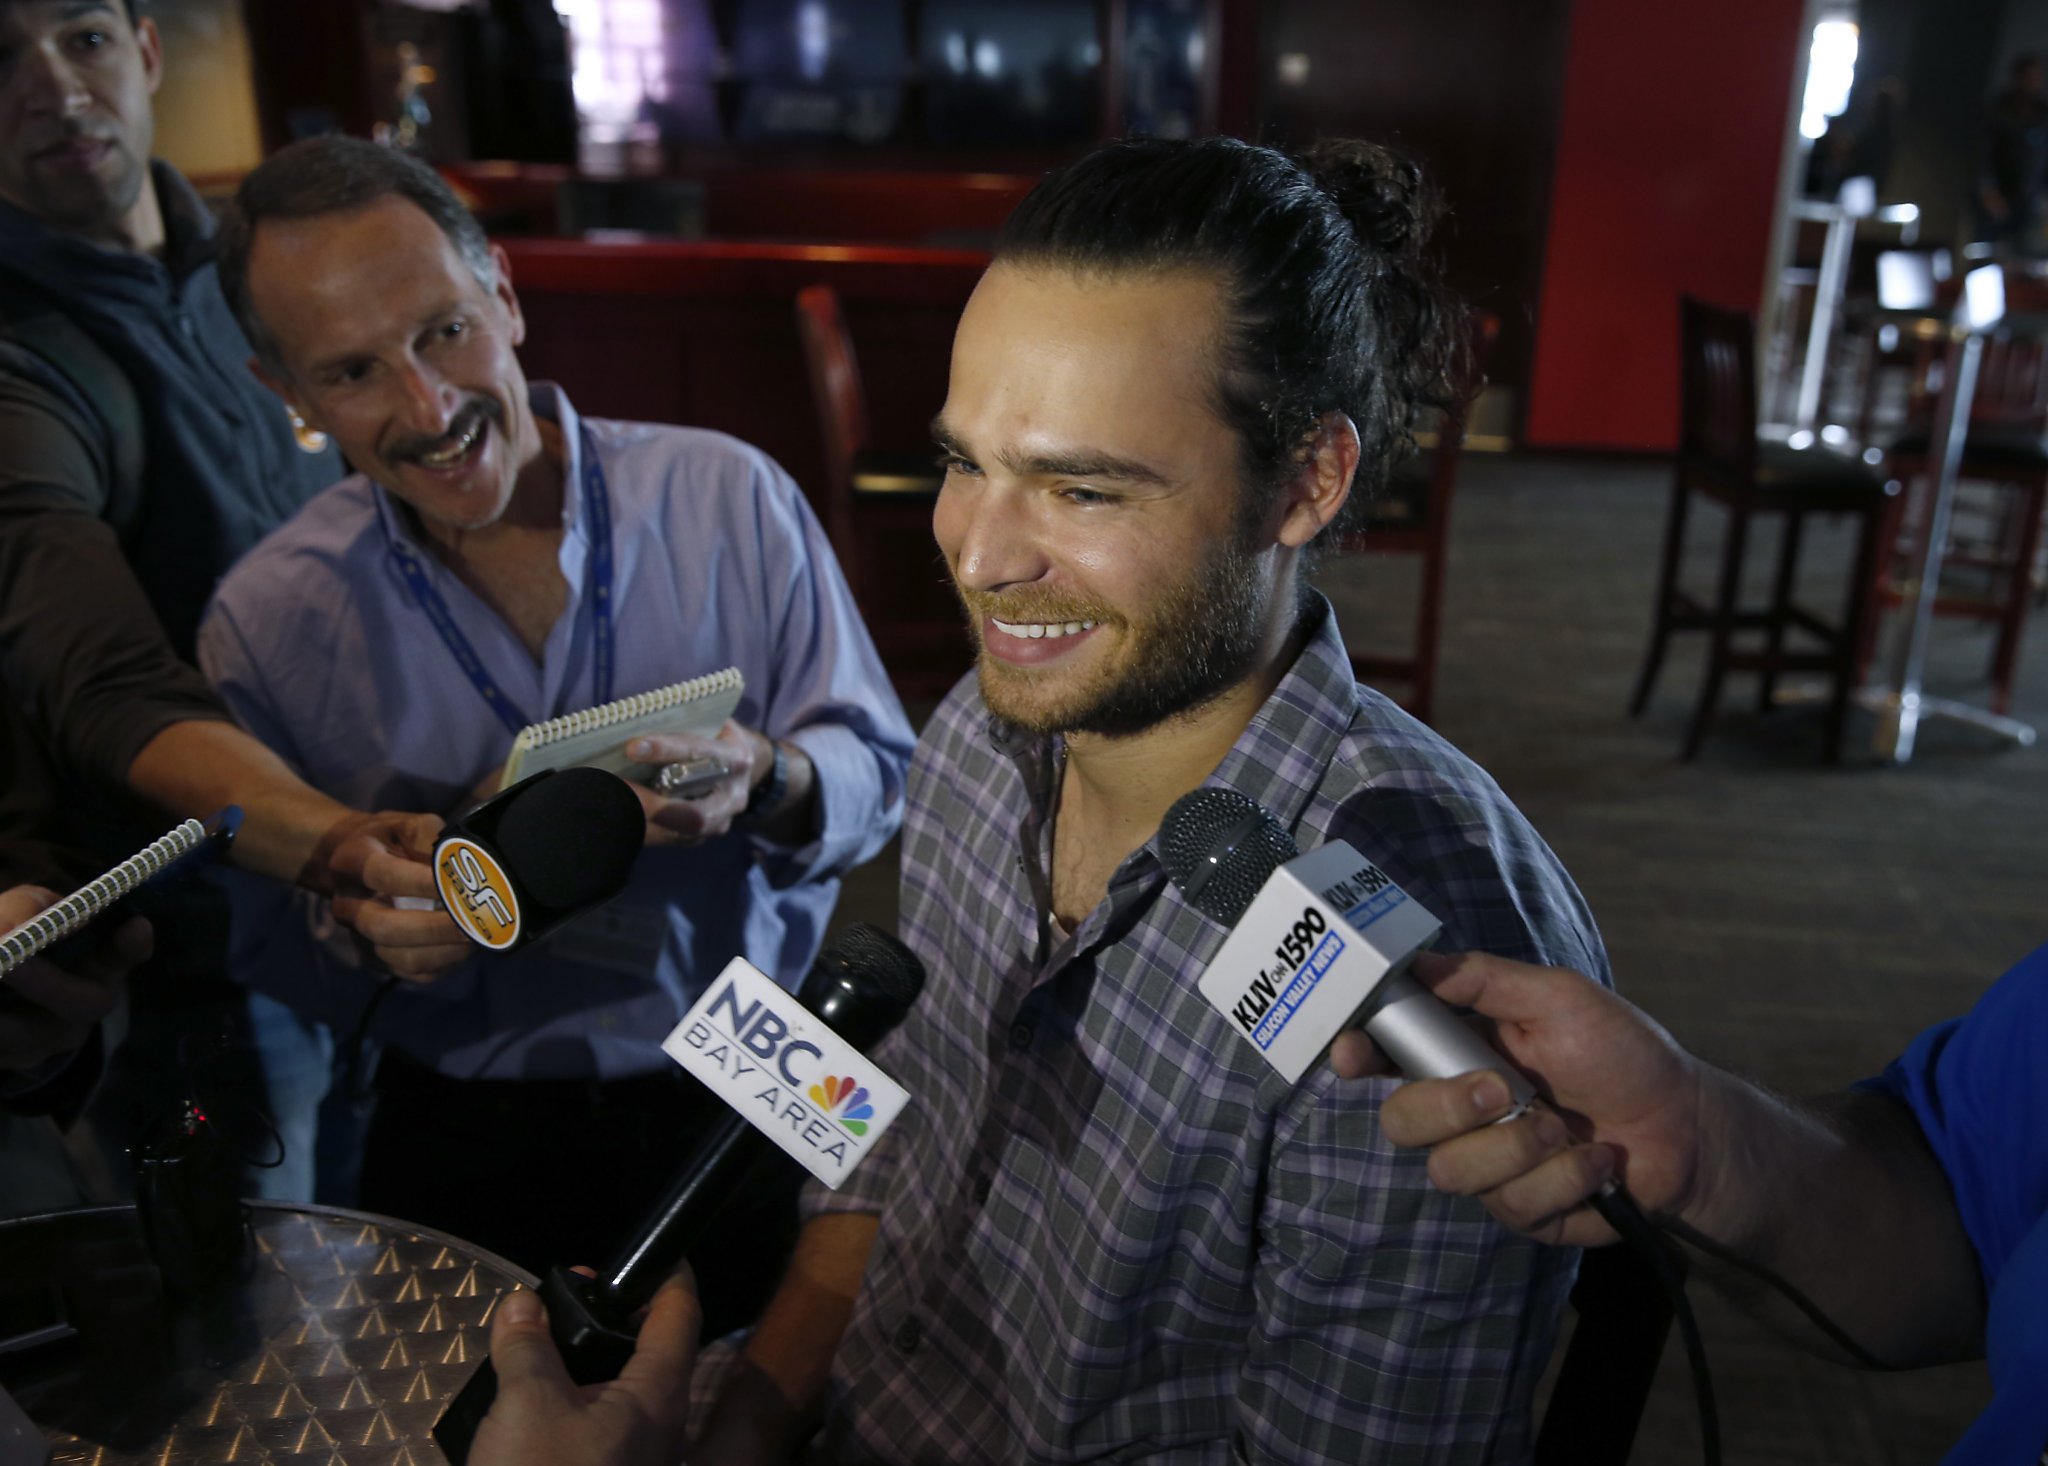 Brandon Crawford reenacts famous Candlestick Park photo in new ad